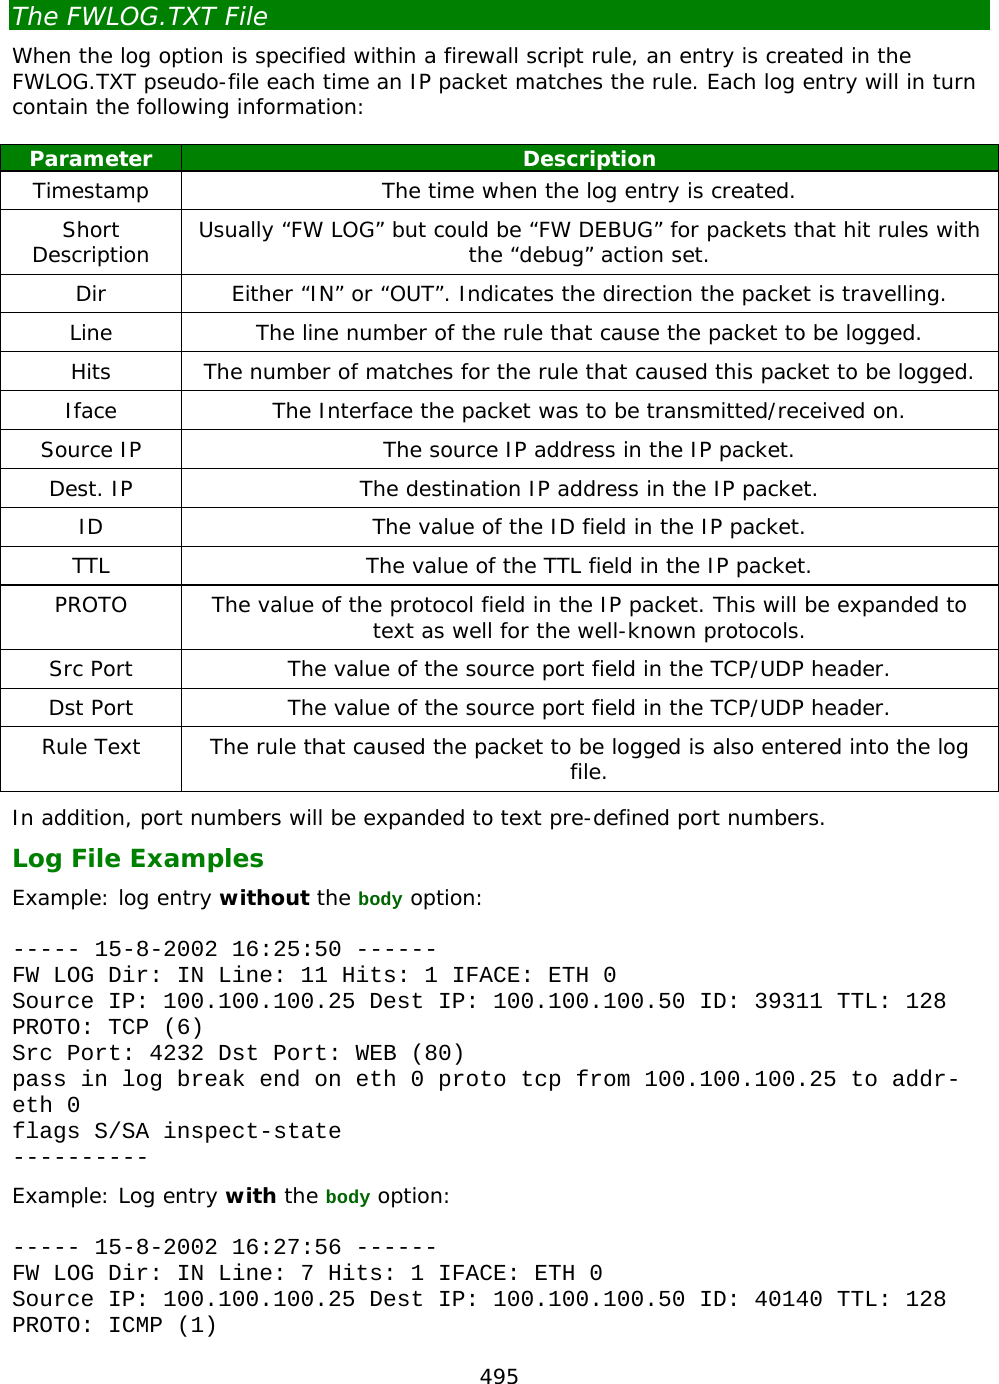 495  The FWLOG.TXT File When the log option is specified within a firewall script rule, an entry is created in the FWLOG.TXT pseudo-file each time an IP packet matches the rule. Each log entry will in turn contain the following information:  Parameter Description Timestamp The time when the log entry is created. Short Description  Usually “FW LOG” but could be “FW DEBUG” for packets that hit rules with the “debug” action set. Dir Either “IN” or “OUT”. Indicates the direction the packet is travelling. Line The line number of the rule that cause the packet to be logged. Hits The number of matches for the rule that caused this packet to be logged. Iface The Interface the packet was to be transmitted/received on. Source IP The source IP address in the IP packet. Dest. IP The destination IP address in the IP packet. ID The value of the ID field in the IP packet. TTL The value of the TTL field in the IP packet. PROTO The value of the protocol field in the IP packet. This will be expanded to text as well for the well-known protocols. Src Port The value of the source port field in the TCP/UDP header. Dst Port The value of the source port field in the TCP/UDP header. Rule Text The rule that caused the packet to be logged is also entered into the log file. In addition, port numbers will be expanded to text pre-defined port numbers. Log File Examples Example: log entry without the body option:  ----- 15-8-2002 16:25:50 ------ FW LOG Dir: IN Line: 11 Hits: 1 IFACE: ETH 0 Source IP: 100.100.100.25 Dest IP: 100.100.100.50 ID: 39311 TTL: 128 PROTO: TCP (6) Src Port: 4232 Dst Port: WEB (80) pass in log break end on eth 0 proto tcp from 100.100.100.25 to addr-eth 0 flags S/SA inspect-state ---------- Example: Log entry with the body option:  ----- 15-8-2002 16:27:56 ------ FW LOG Dir: IN Line: 7 Hits: 1 IFACE: ETH 0 Source IP: 100.100.100.25 Dest IP: 100.100.100.50 ID: 40140 TTL: 128 PROTO: ICMP (1) 